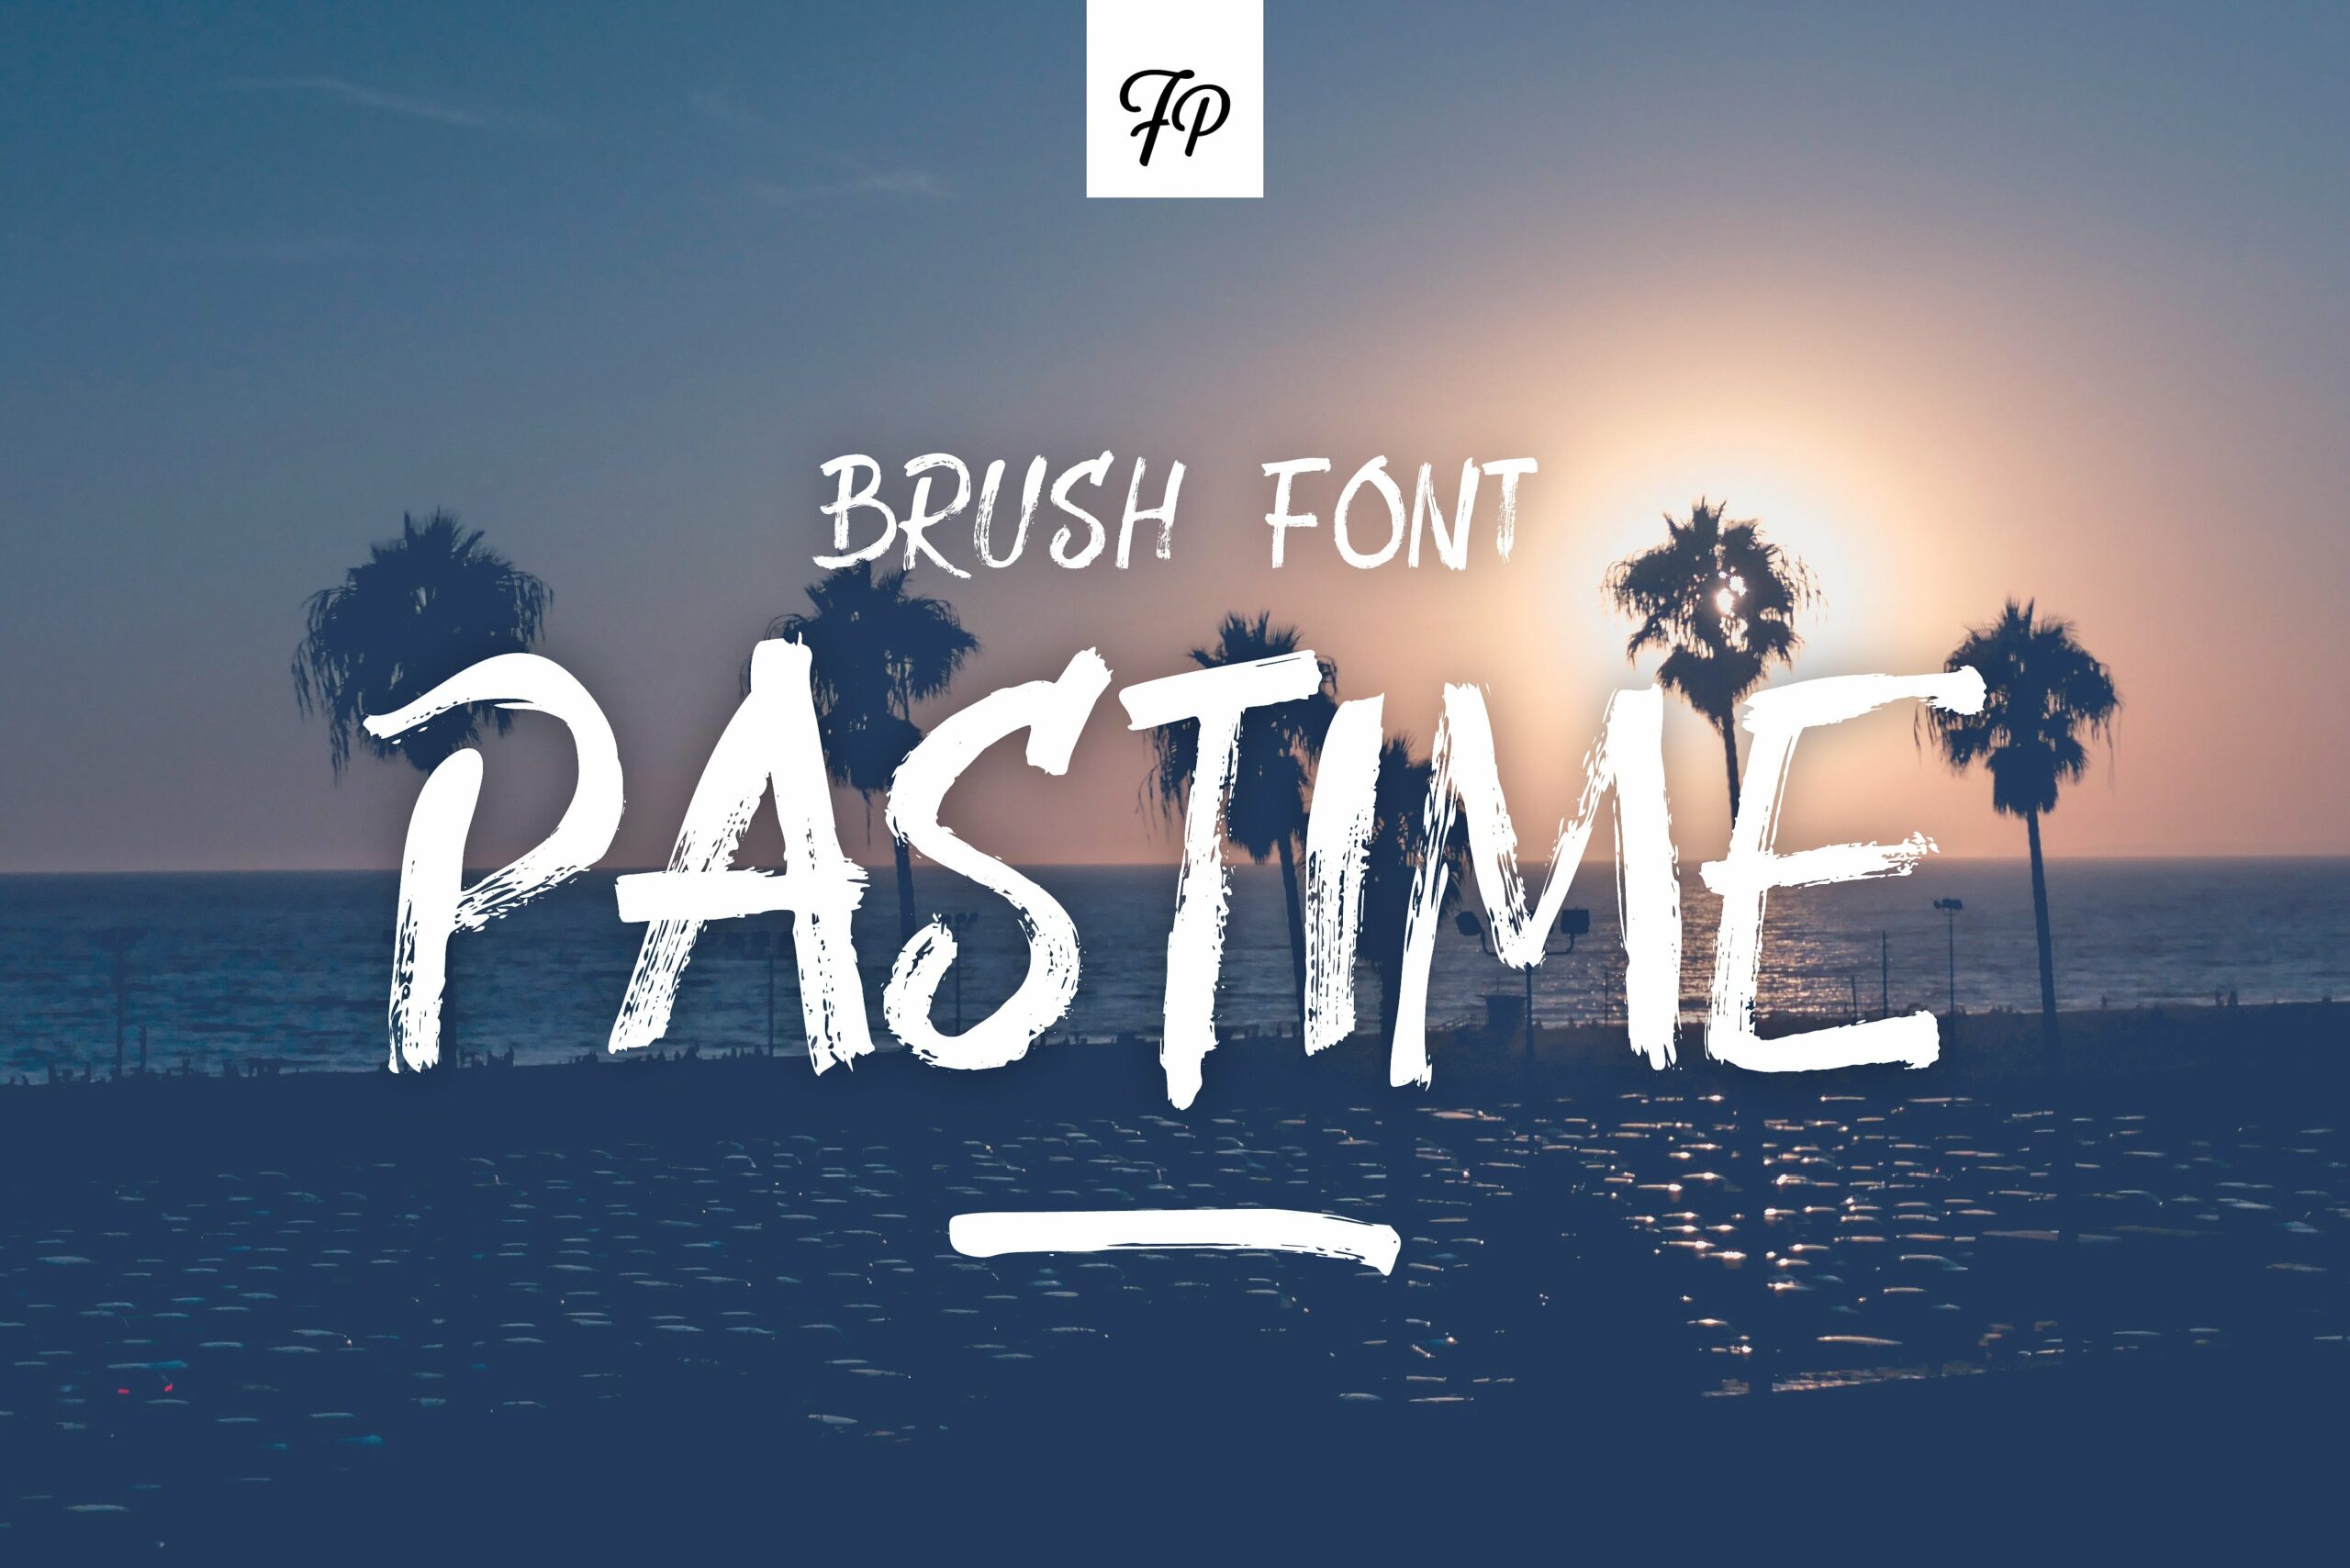 Pastime Font Poster 1